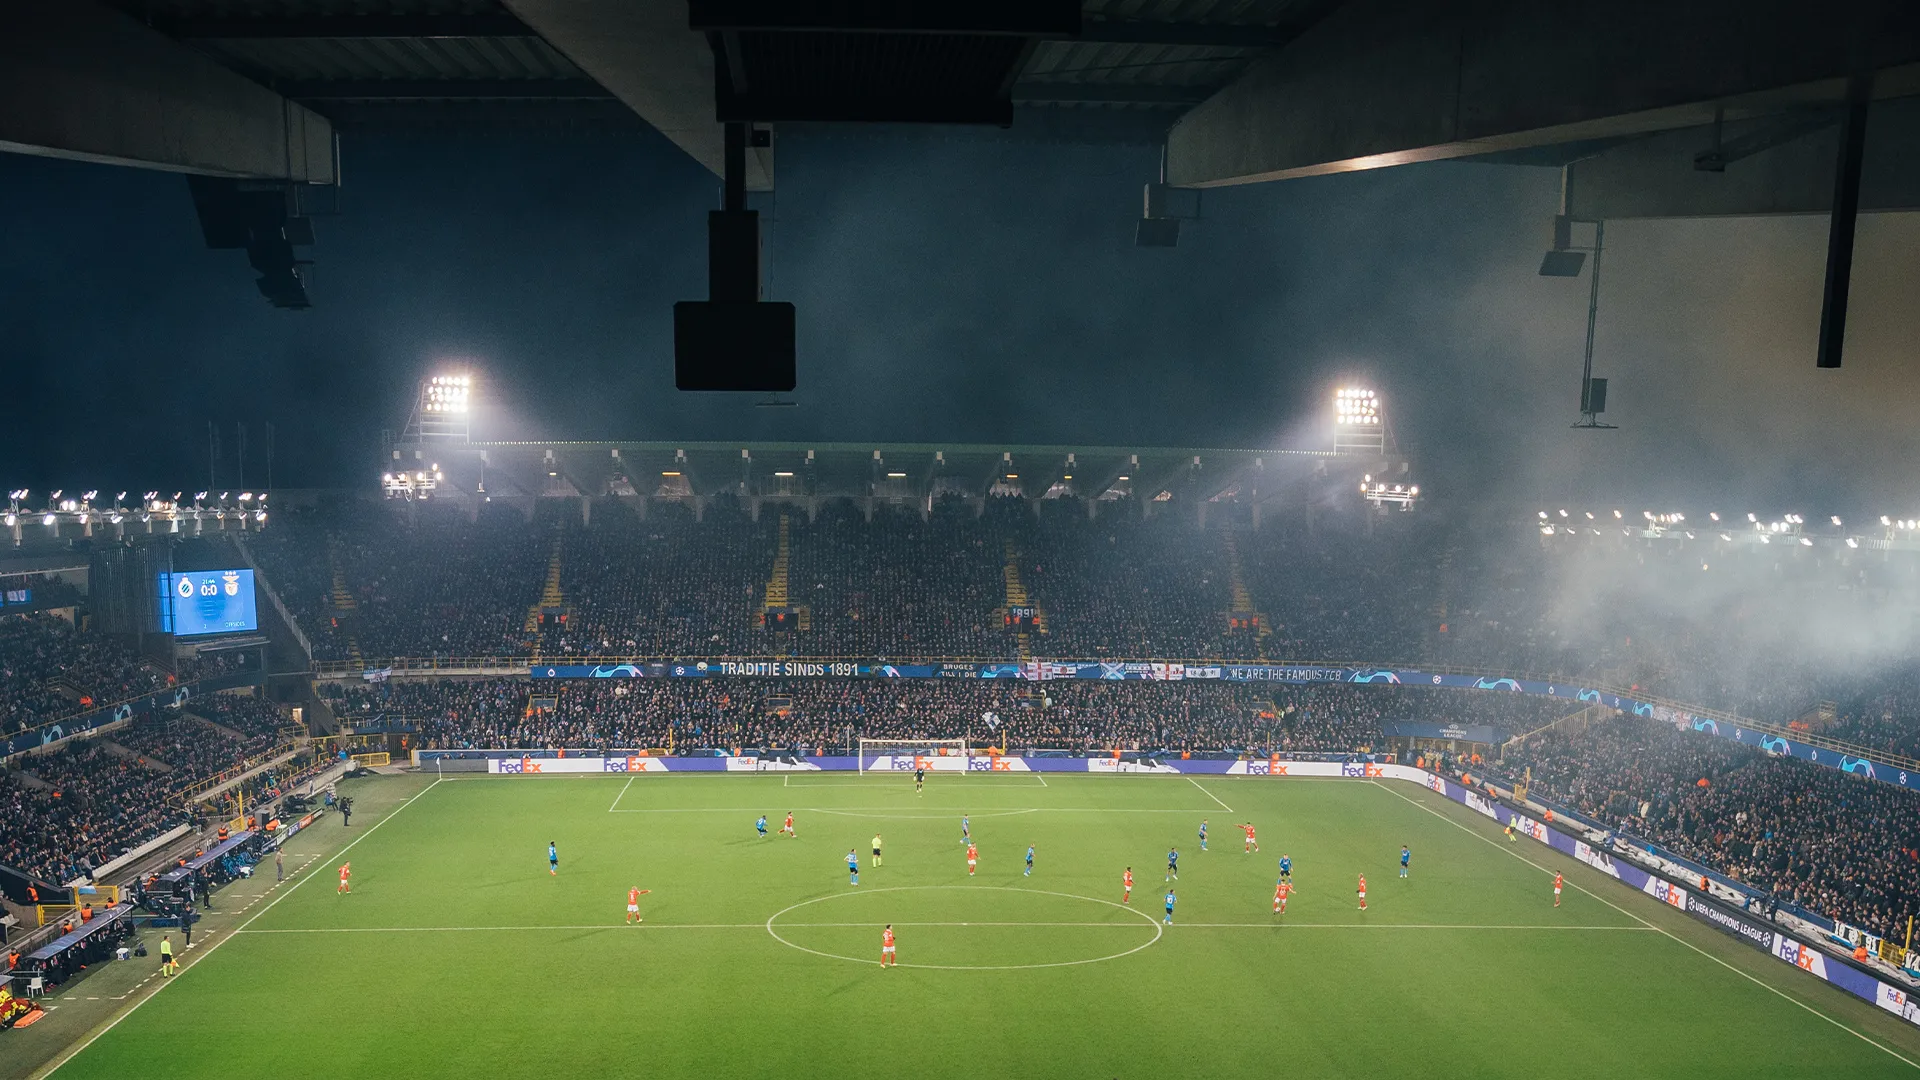 Club Brugge Overview